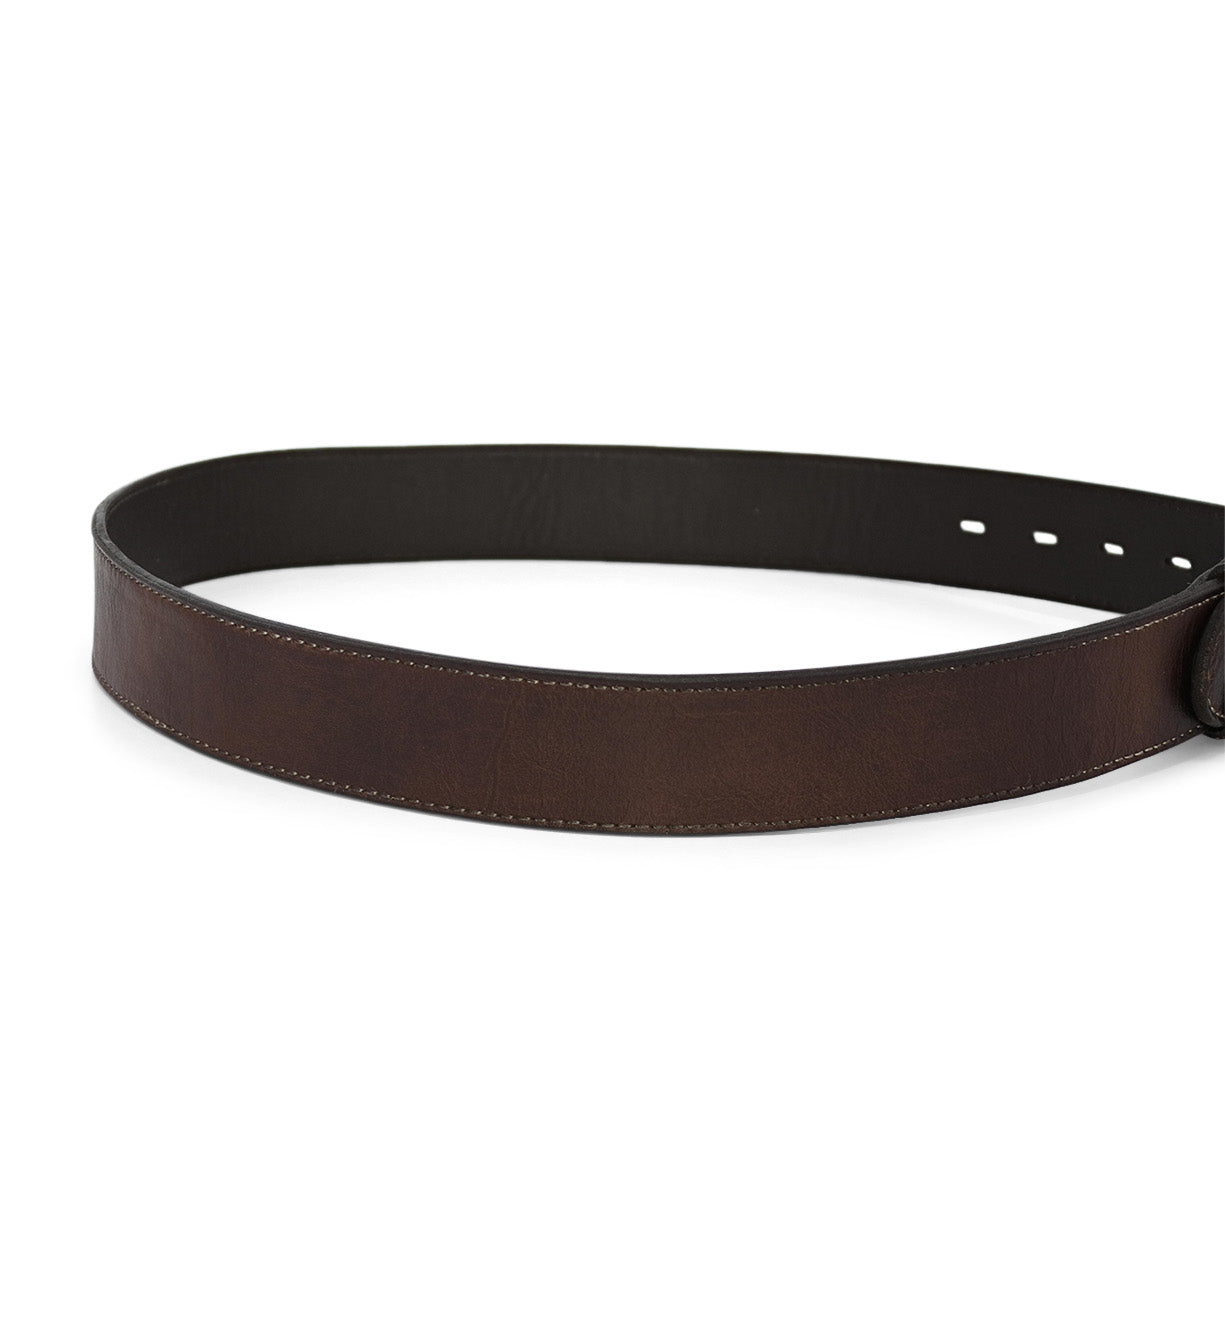 A Bed Stu Meander brown leather belt on a white background.